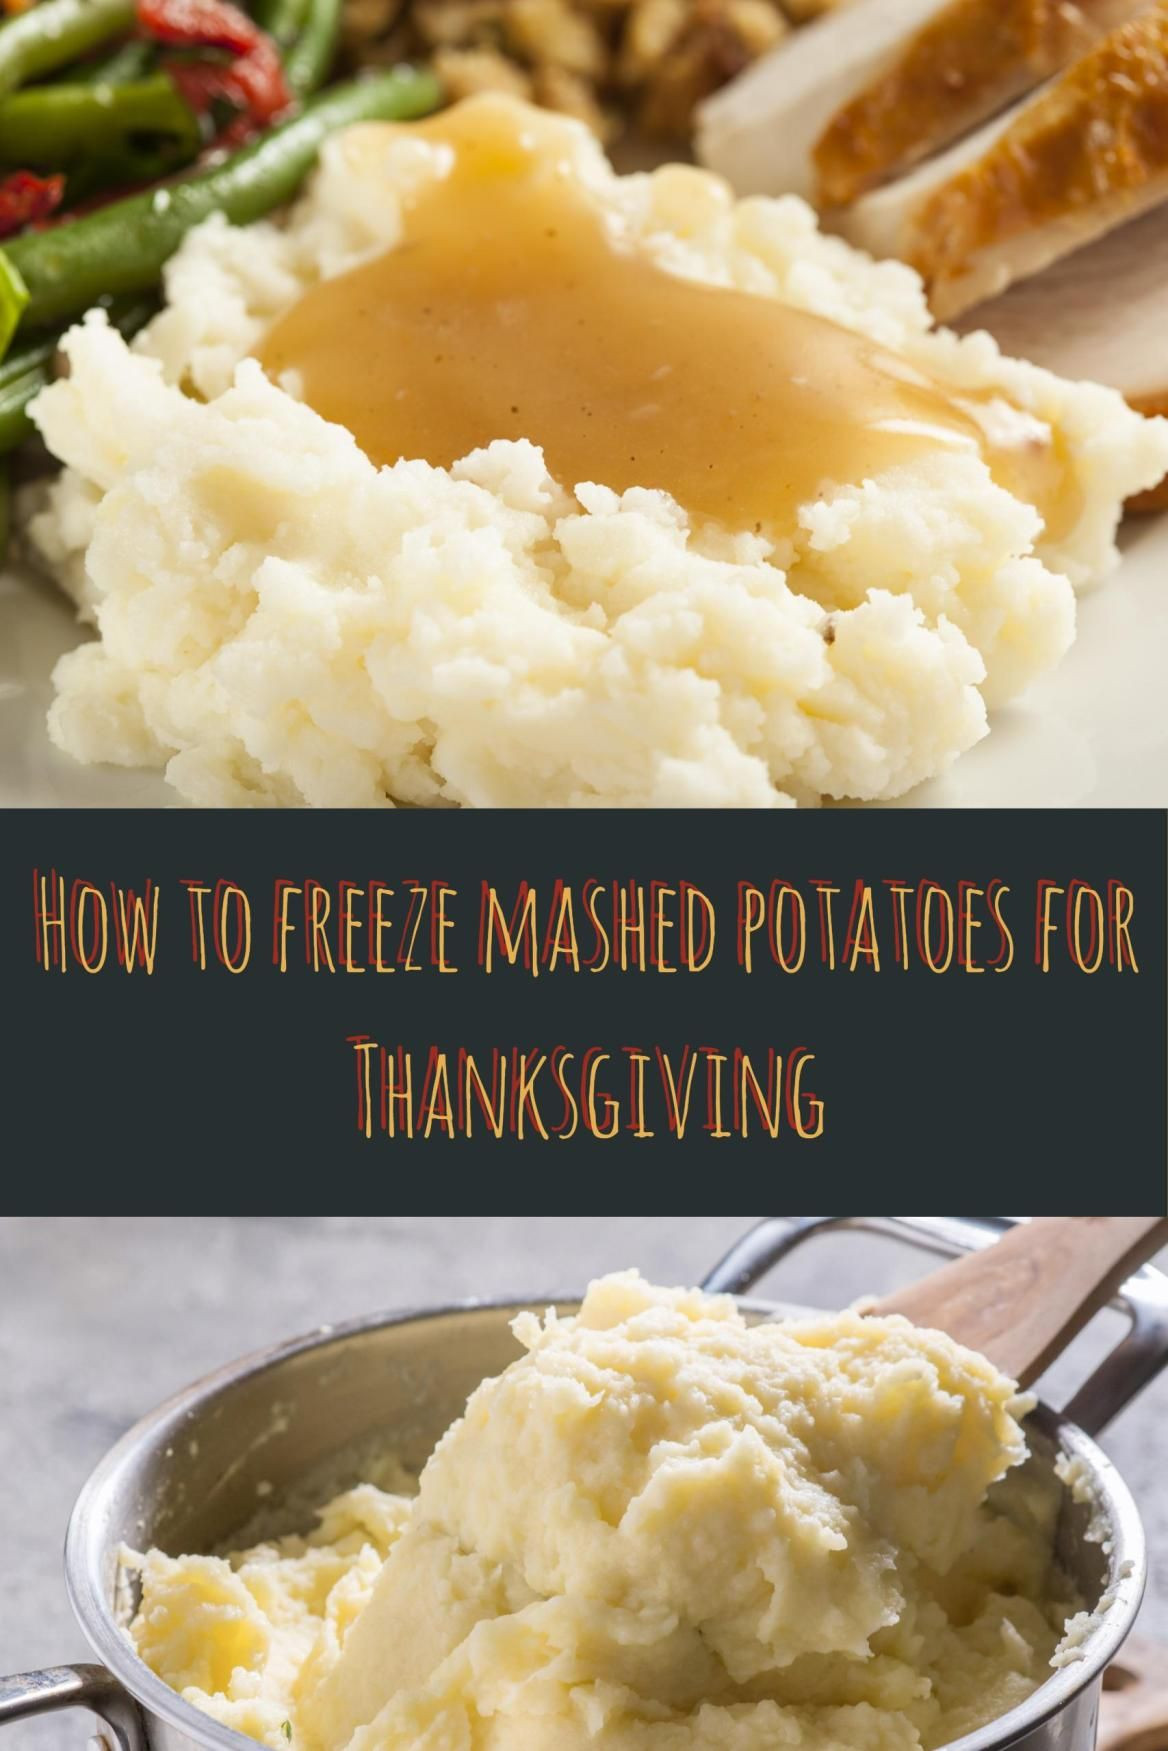 Make Ahead Mashed Potatoes Freezer
 How To Freeze Mashed Potatoes Now For Thanksgiving